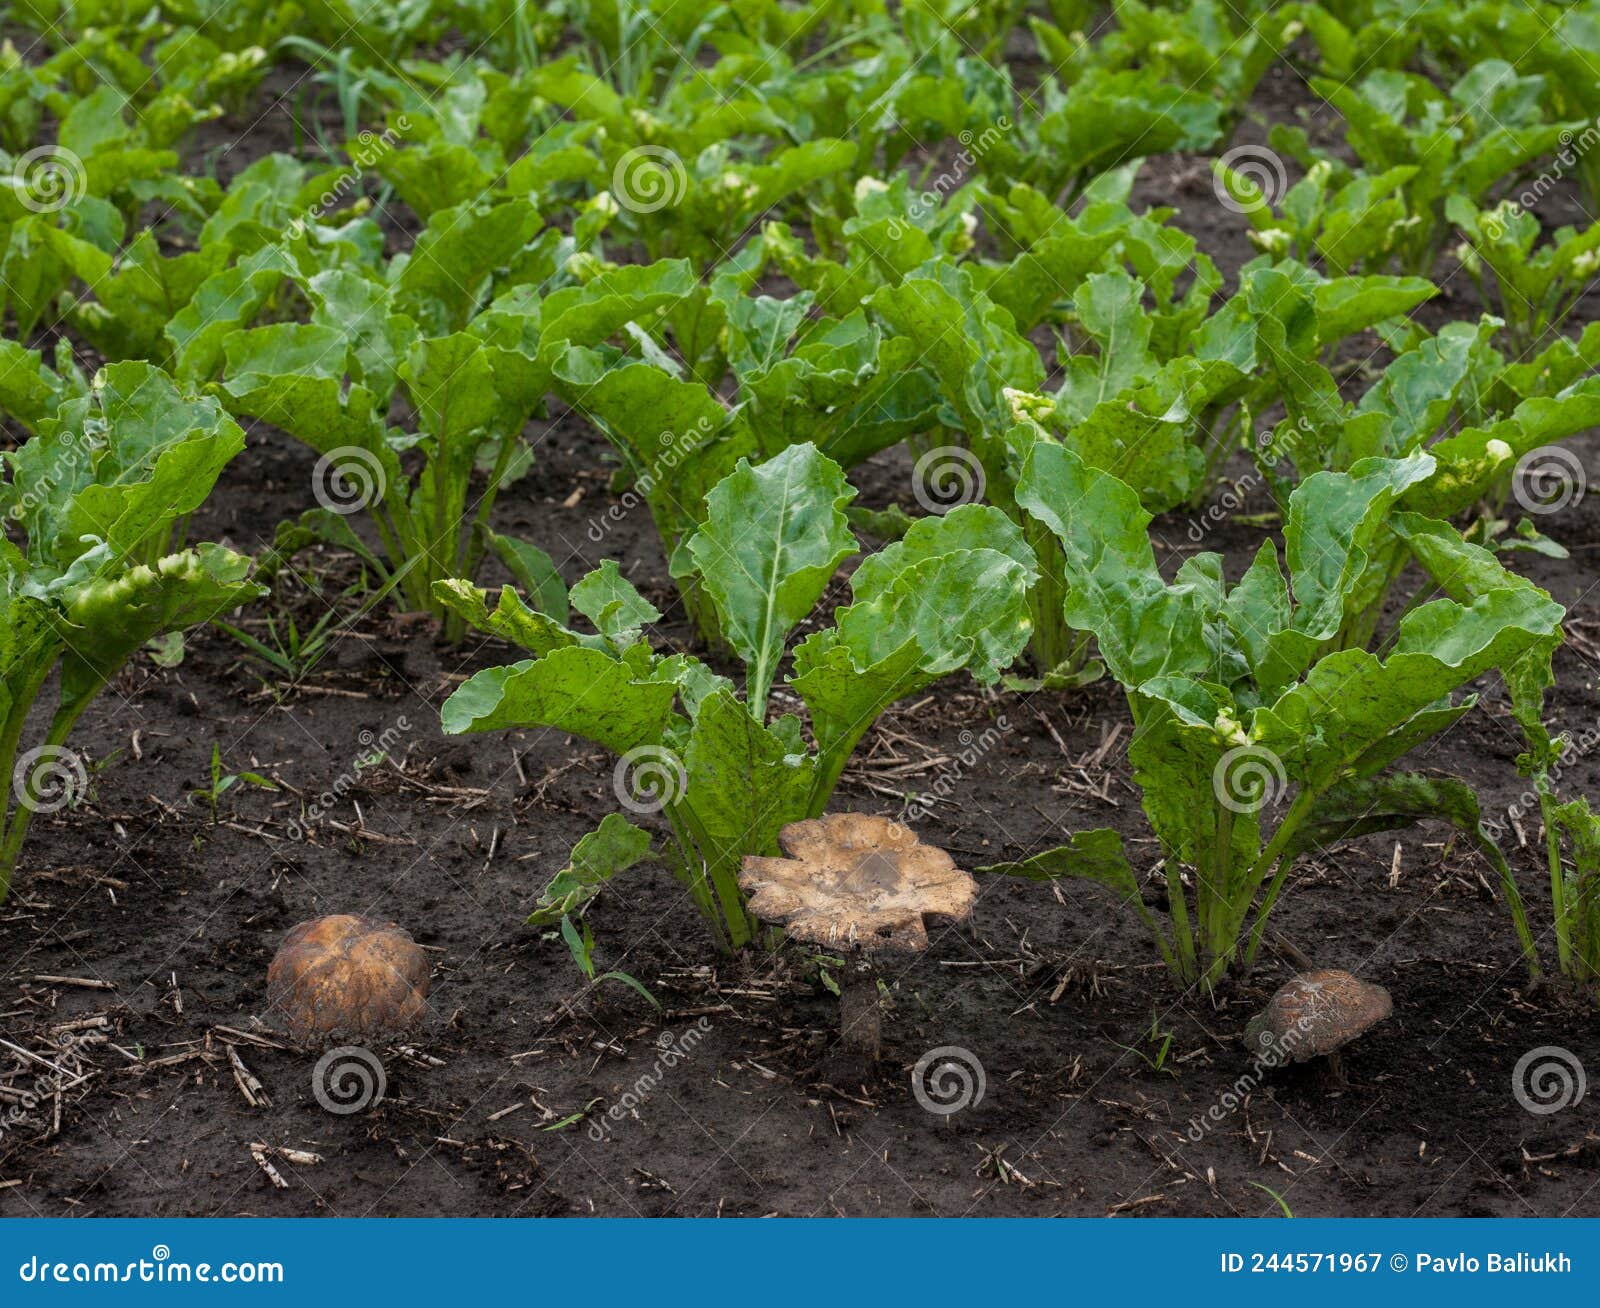 beet leaves in spring and mushrooms fungal, fungicides